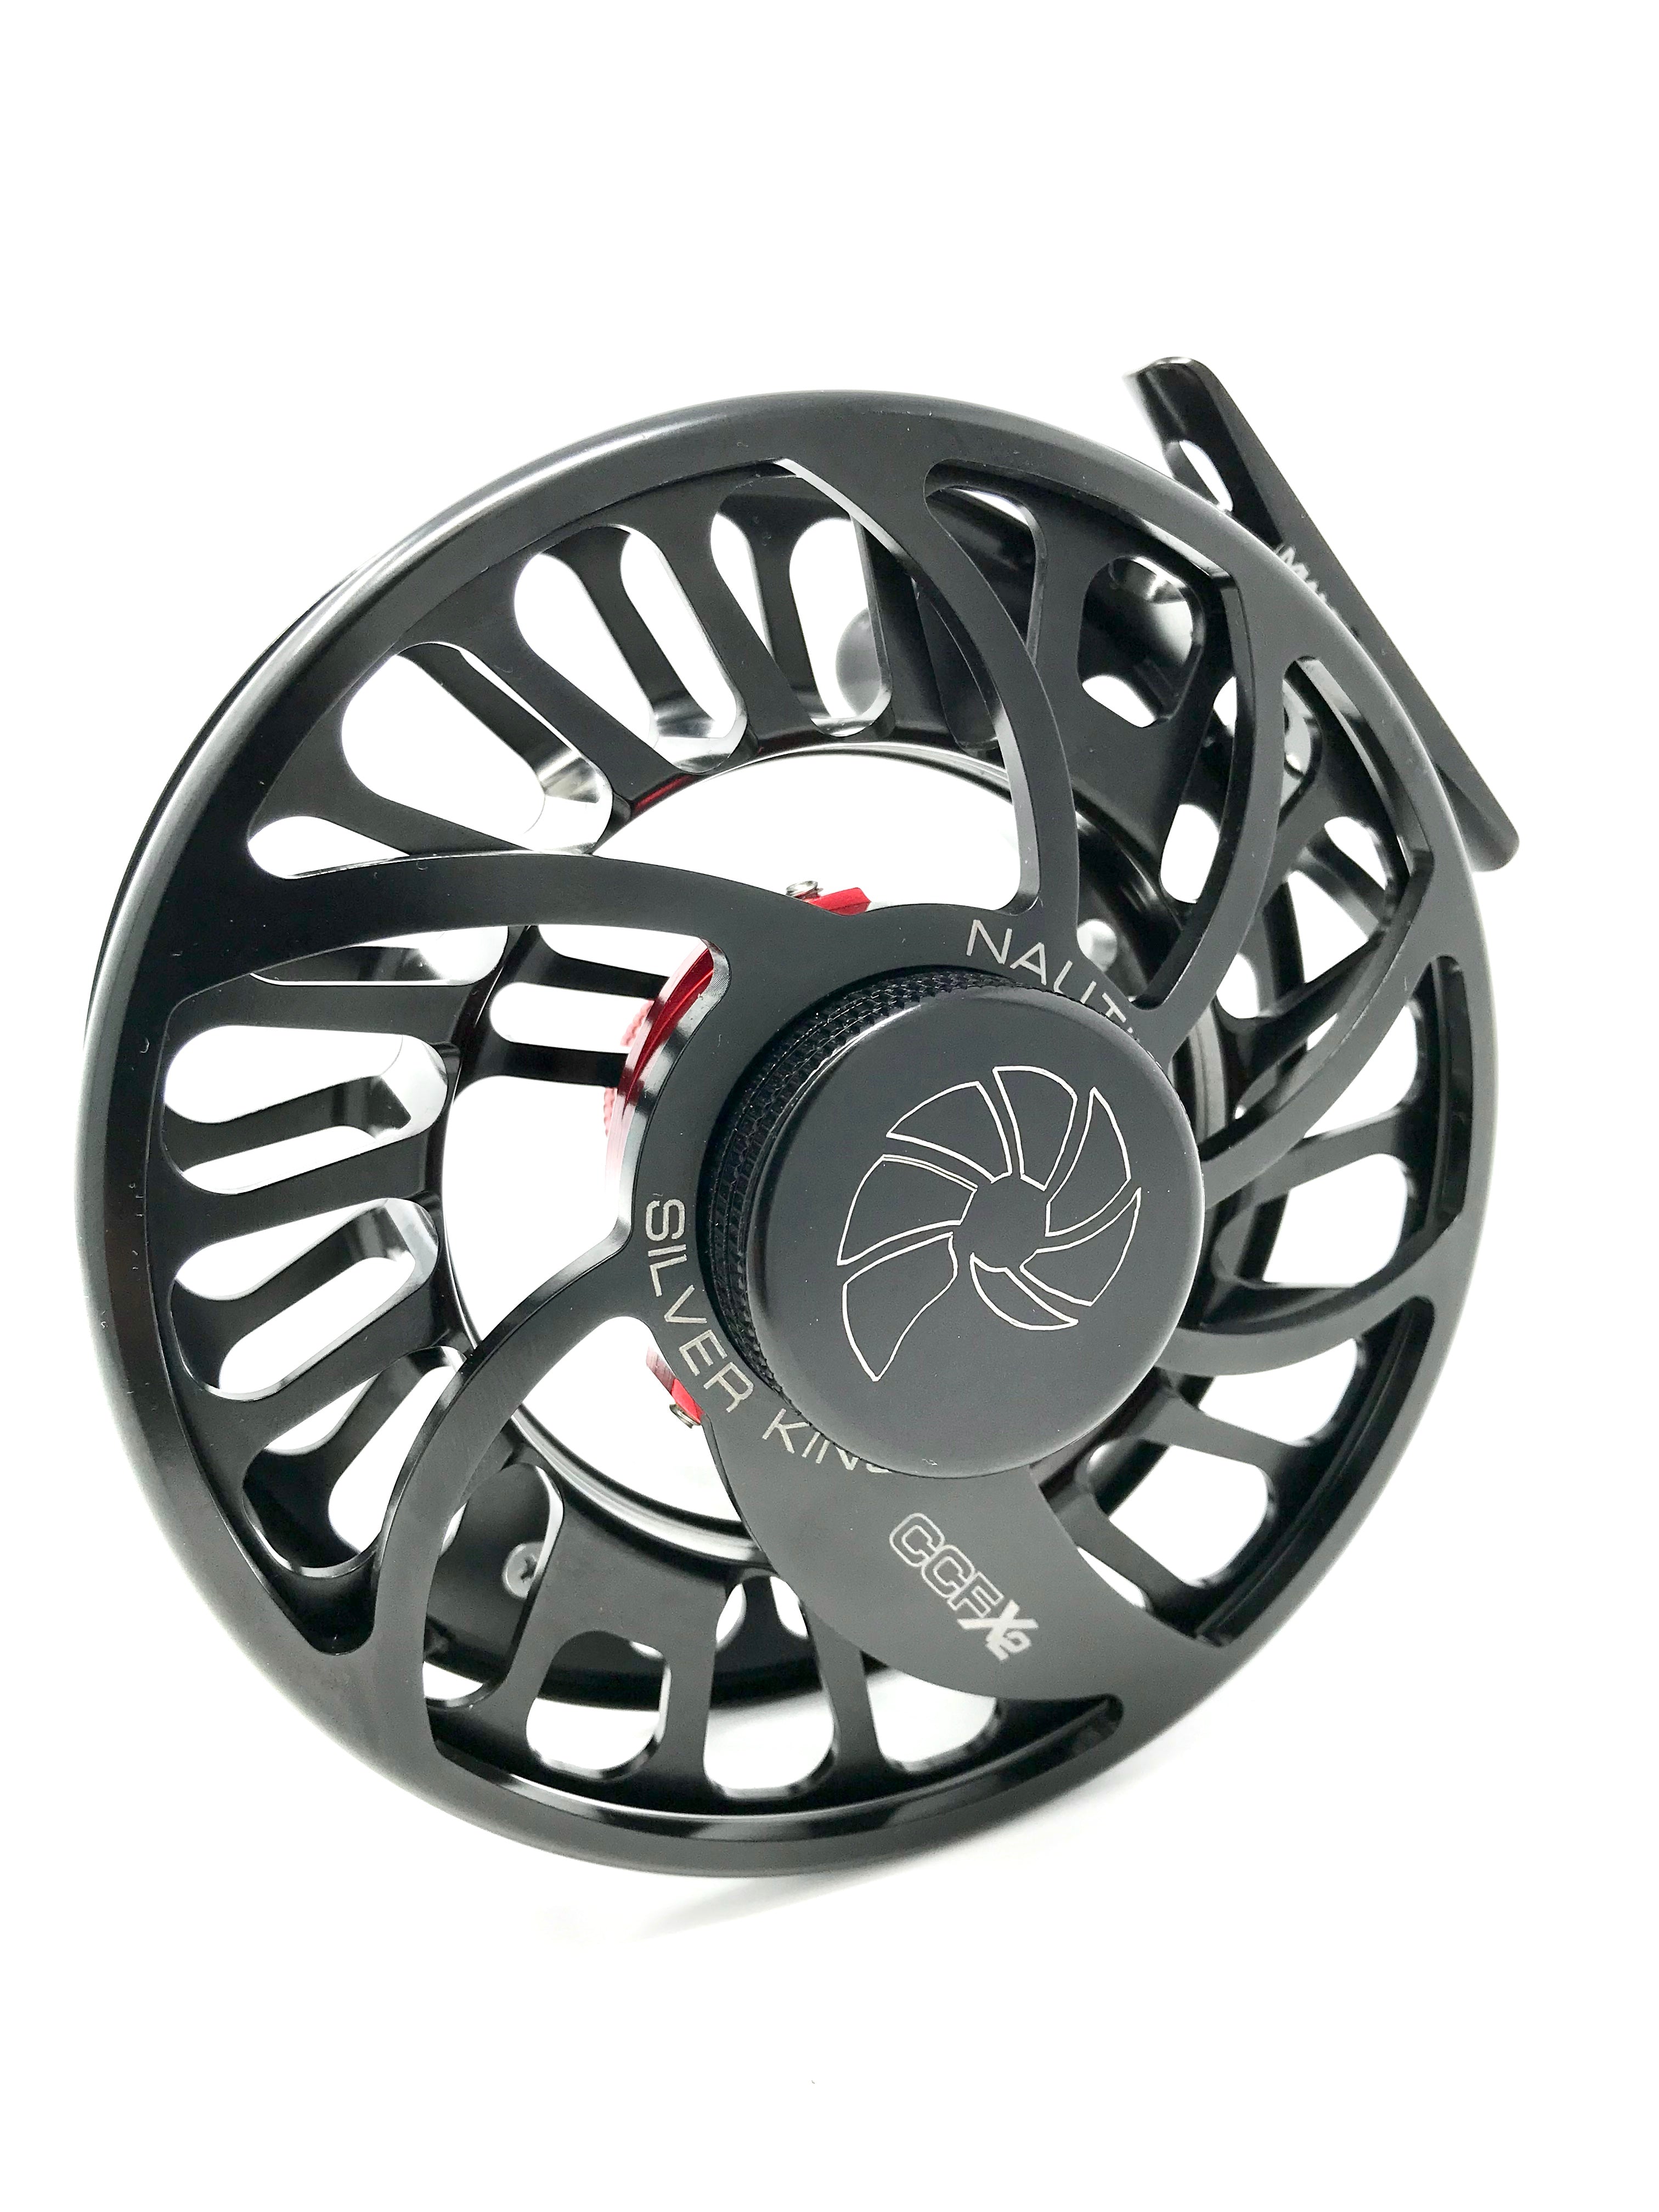 Nautilus CCF-X2 Silver King Fly Reel- clear